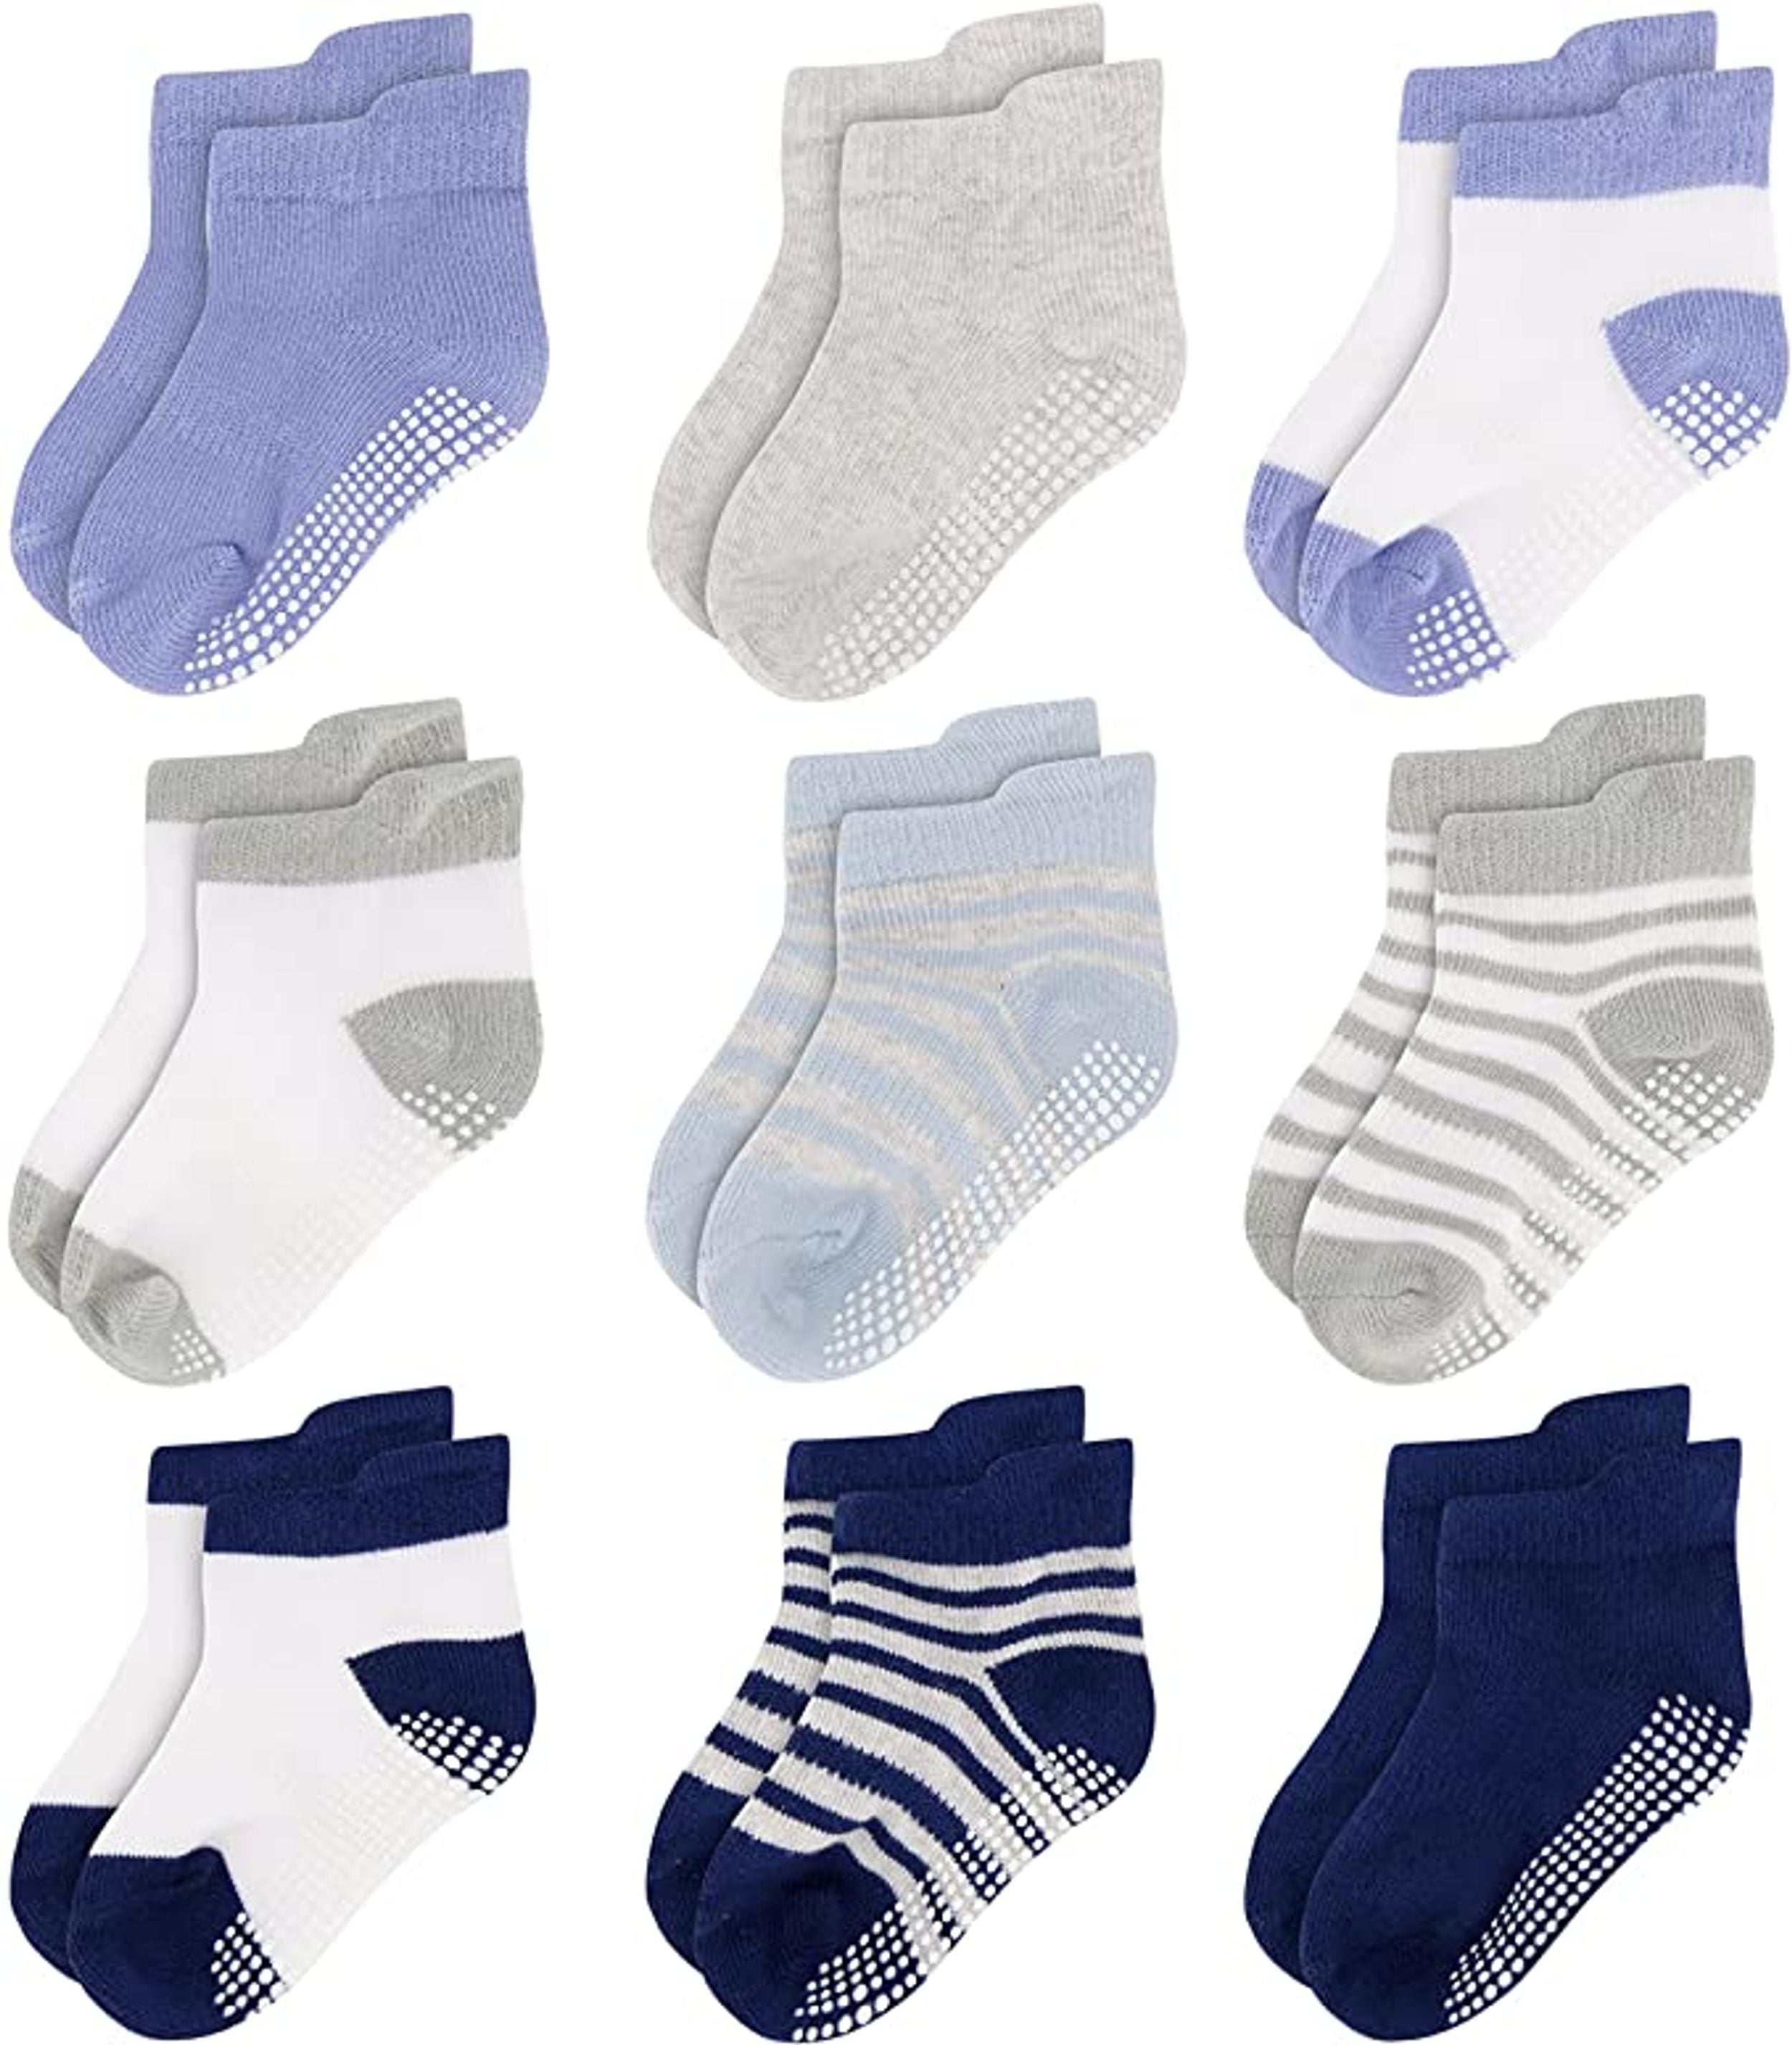 Rising Star Unisex Non Slip Low-Cut Grip Socks for Infants and Toddlers ...